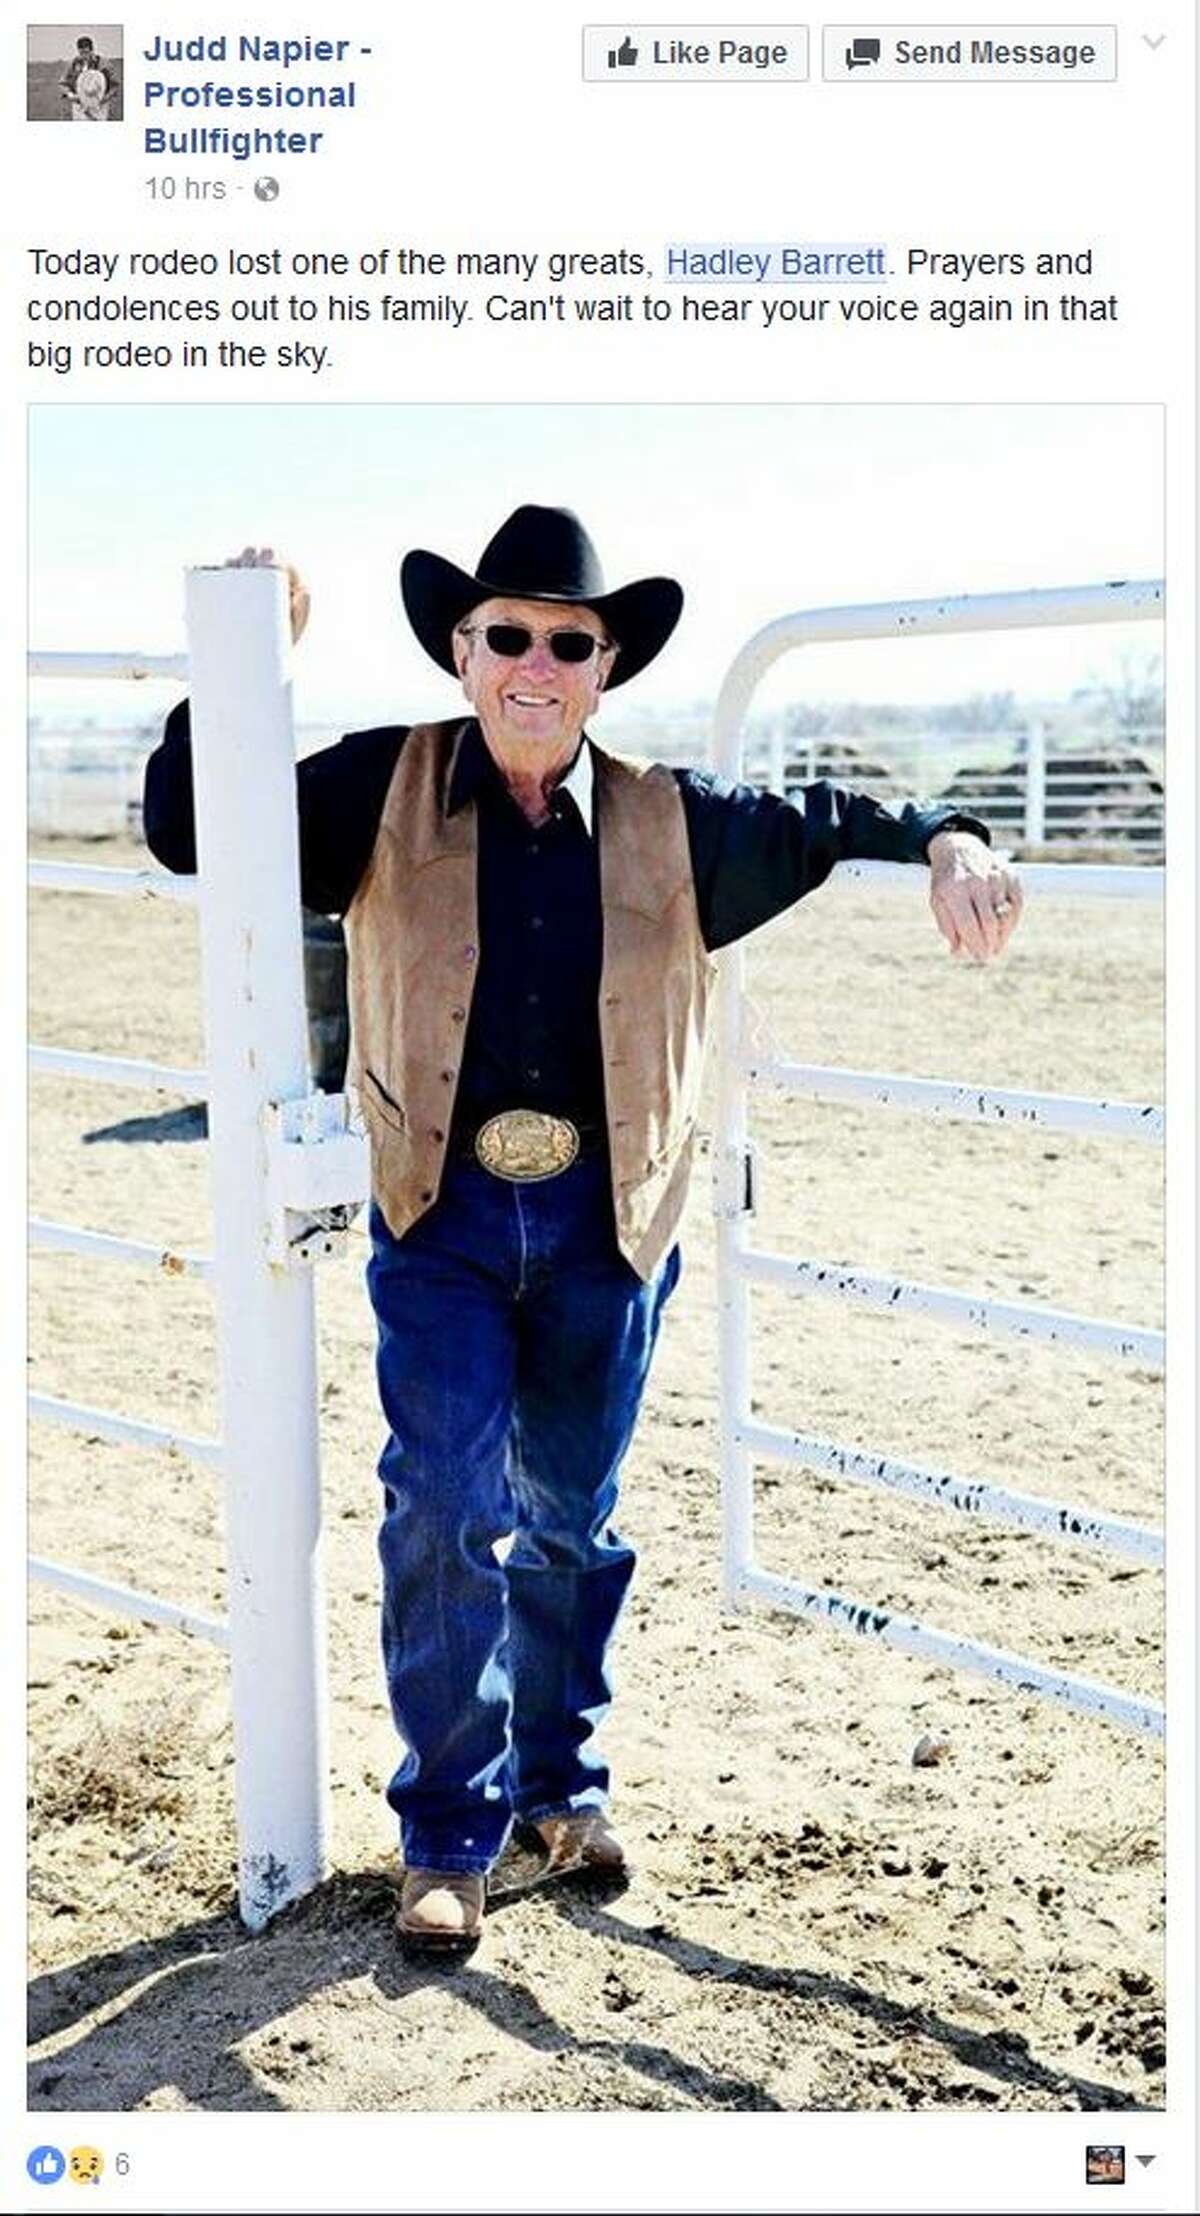 Today rodeo lost one of the many greats, Hadley Barrett. Prayers and condolences out to his family. Can't wait to hear your voice again in that big rodeo in the sky.